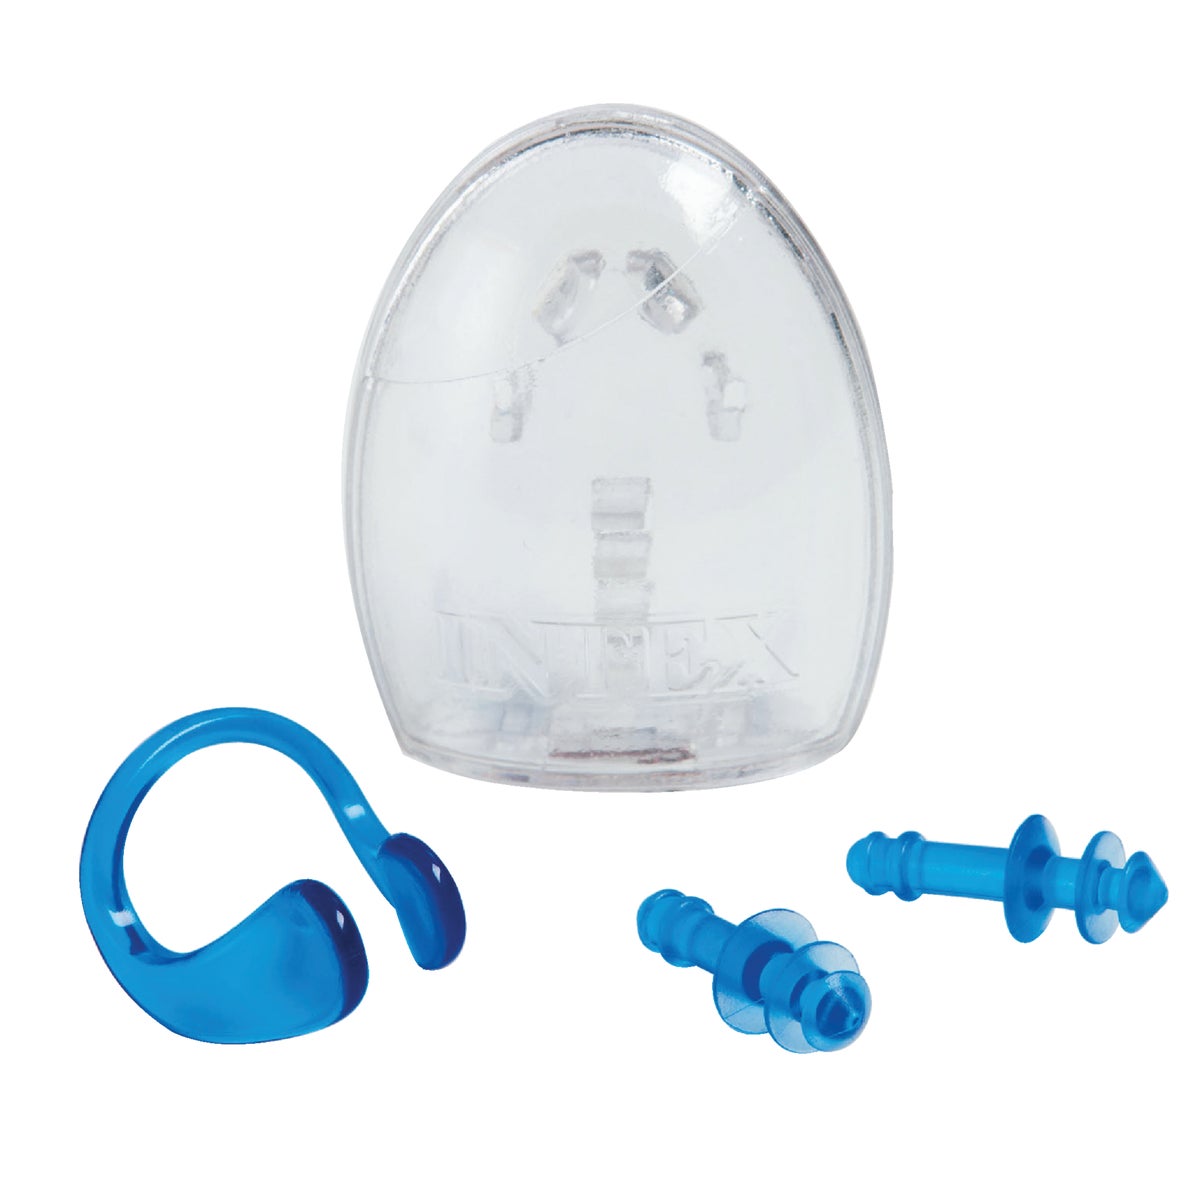 Item 843547, Comfort fit designs. Soft rubber nose clip and ear plugs with case.